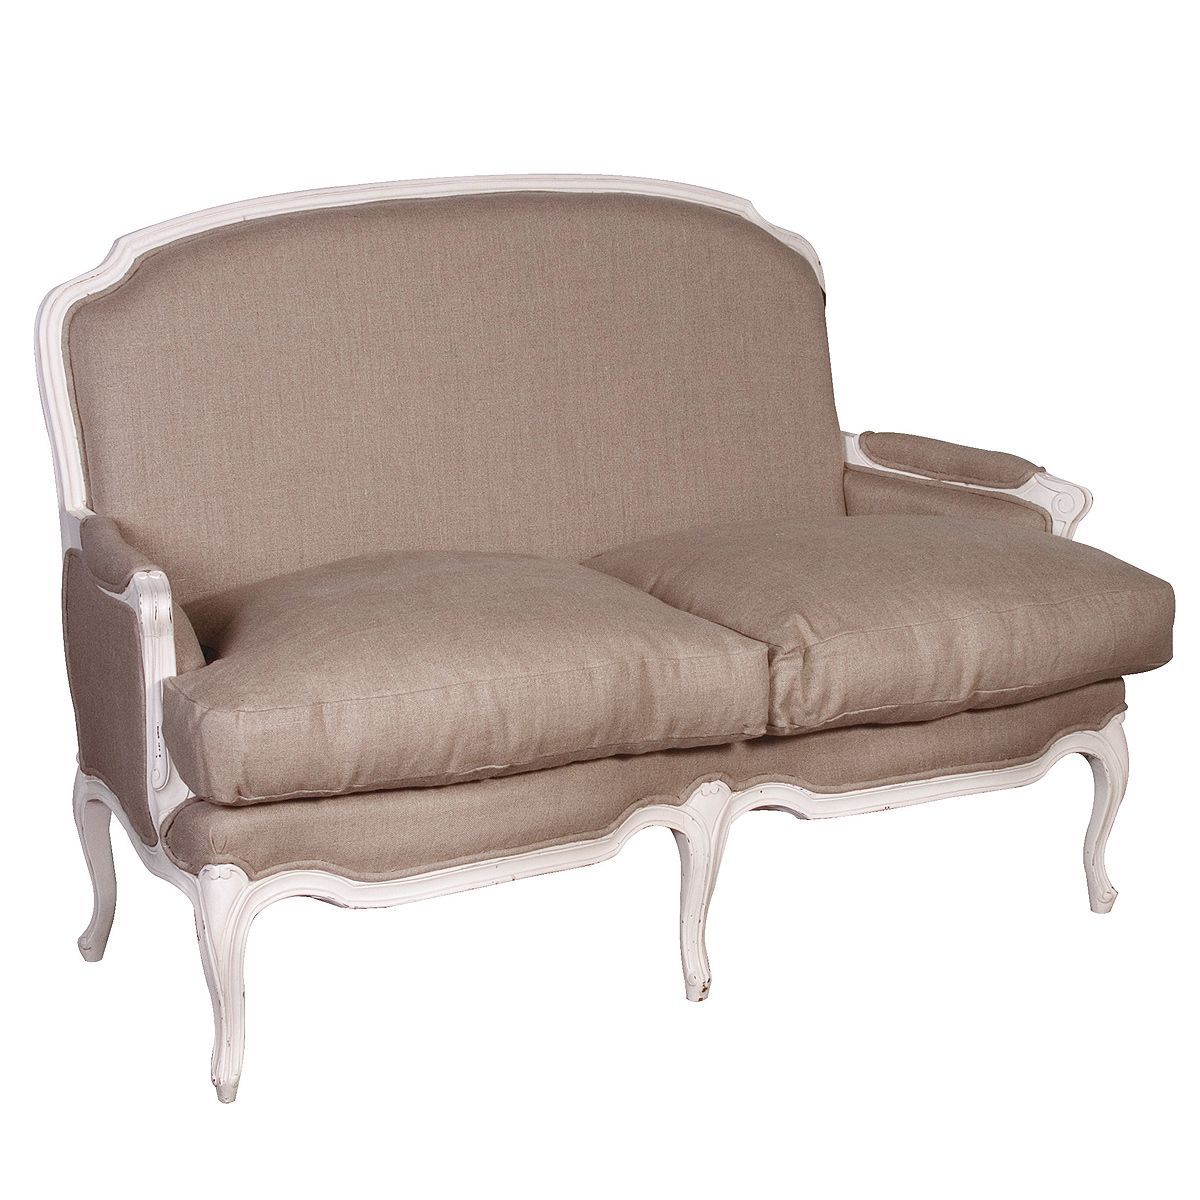 Provencal Linen Sofa | French Furniture Bedroom, Furniture With Setoril Modern Sectional Sofa Swith Chaise Woven Linen (View 13 of 15)